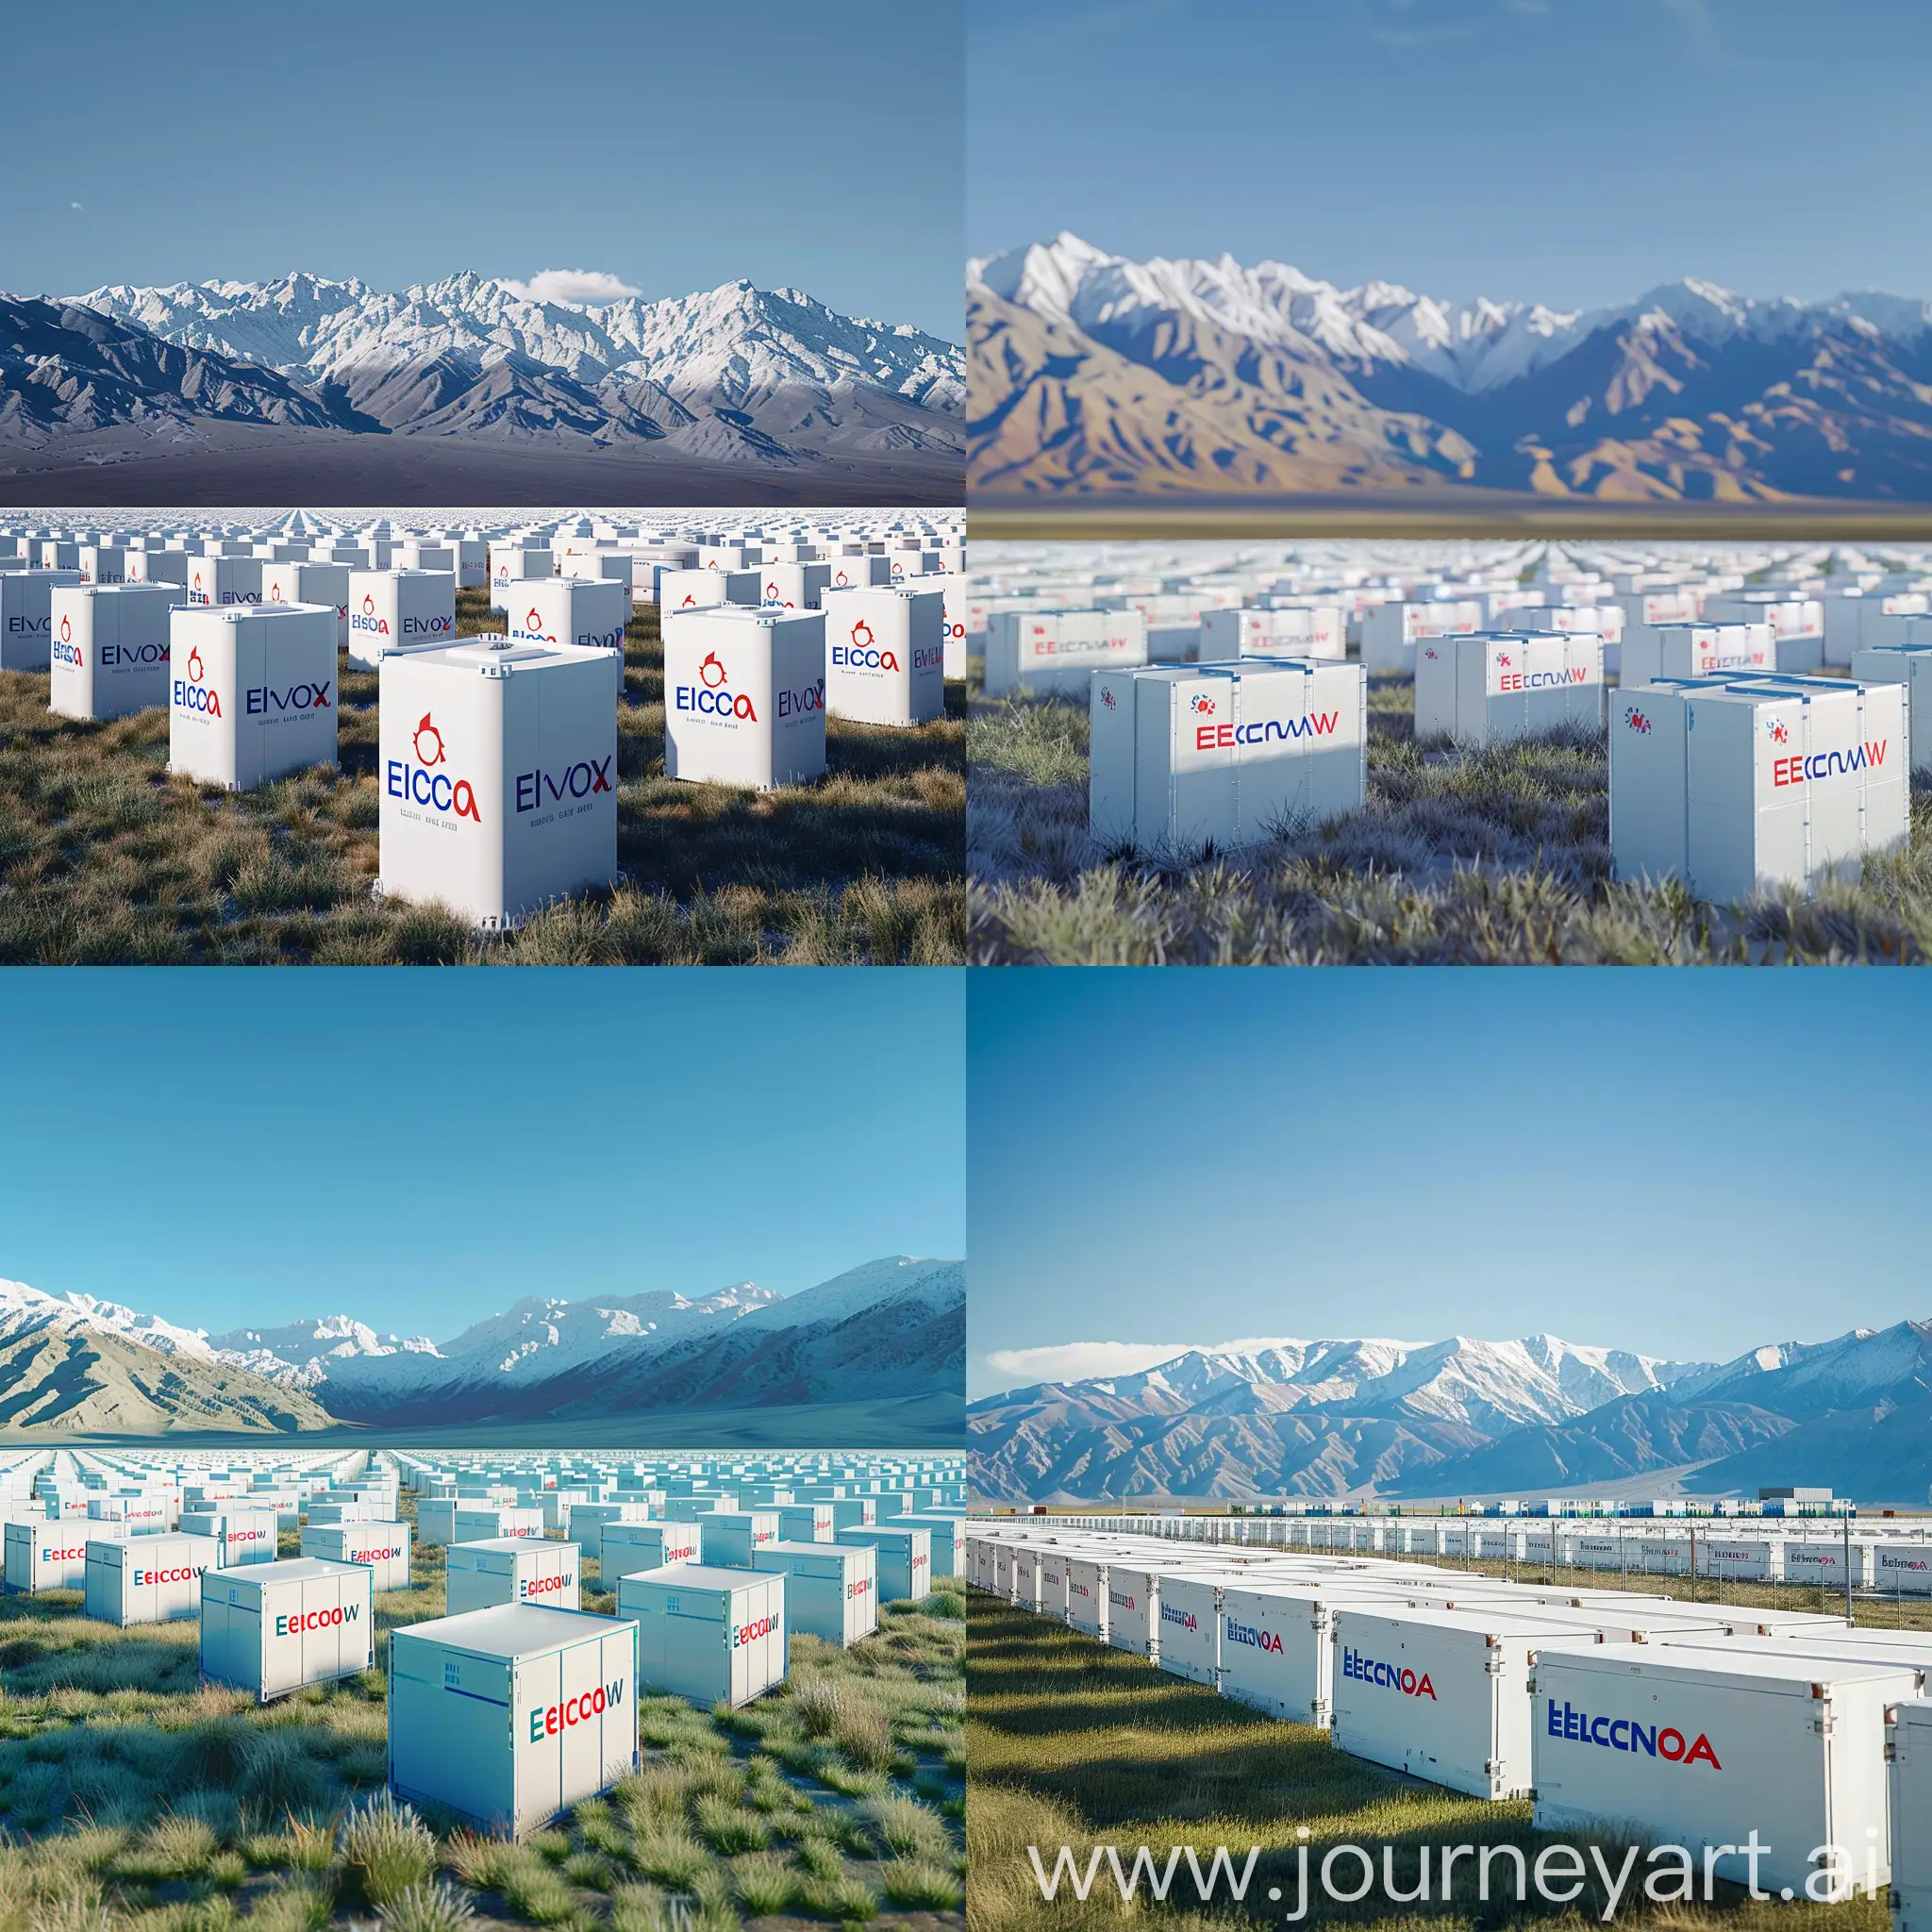 grass, grid, background, a lot of energy storage container raw in ground, mountain, blue sky, In the desert of western, there is an energy storage facility with many white containers that have red and blue logos Elecnova on them, arranged in rows like city blocks. The sky above shows clear skies, while behind it stand tall mountains covered in snow. 